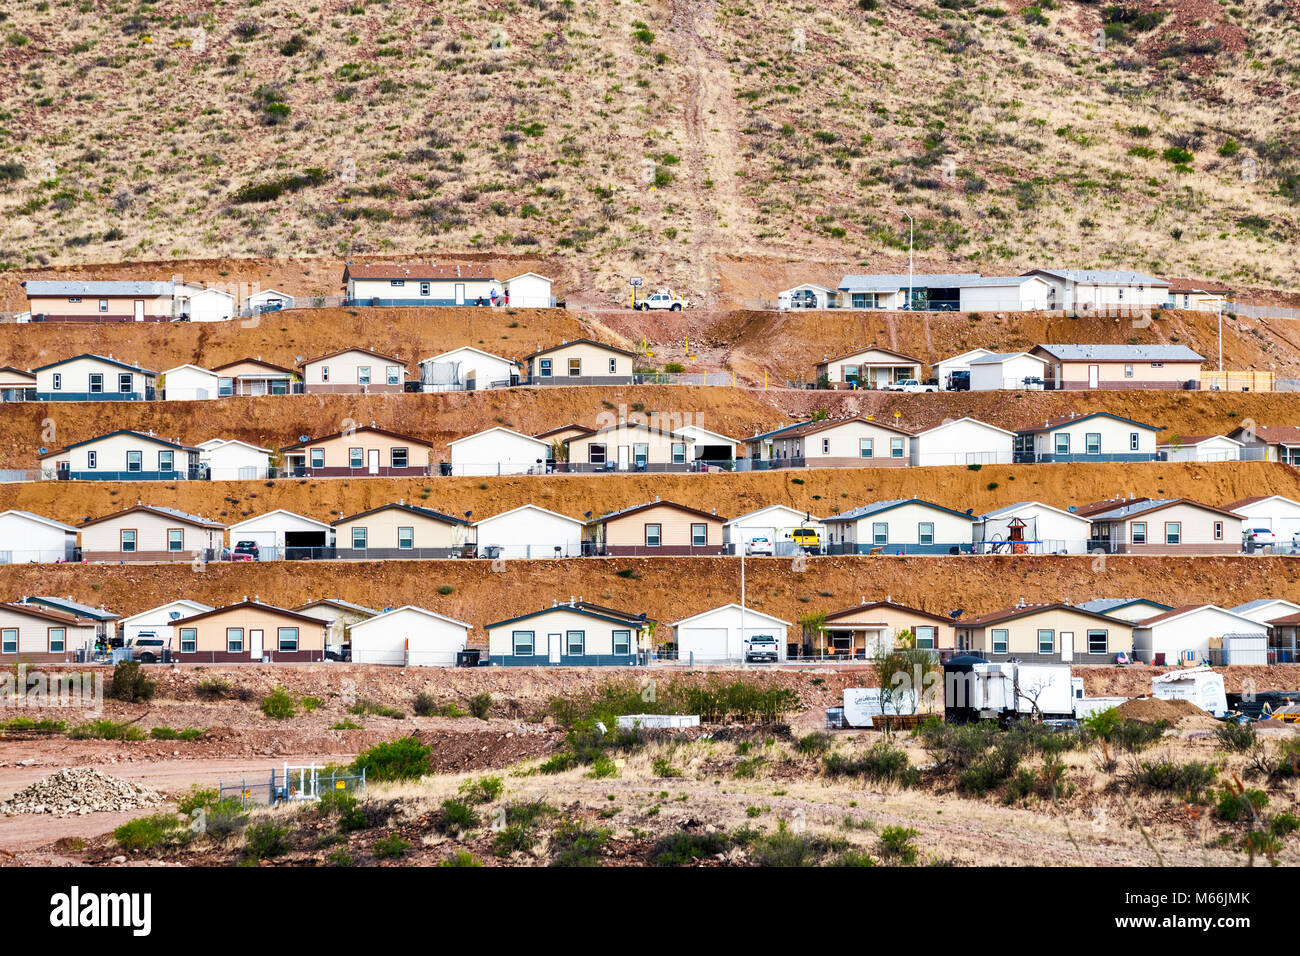 Single family houses in residential area in company town of Morenci, Arizona, USA Stock Photo